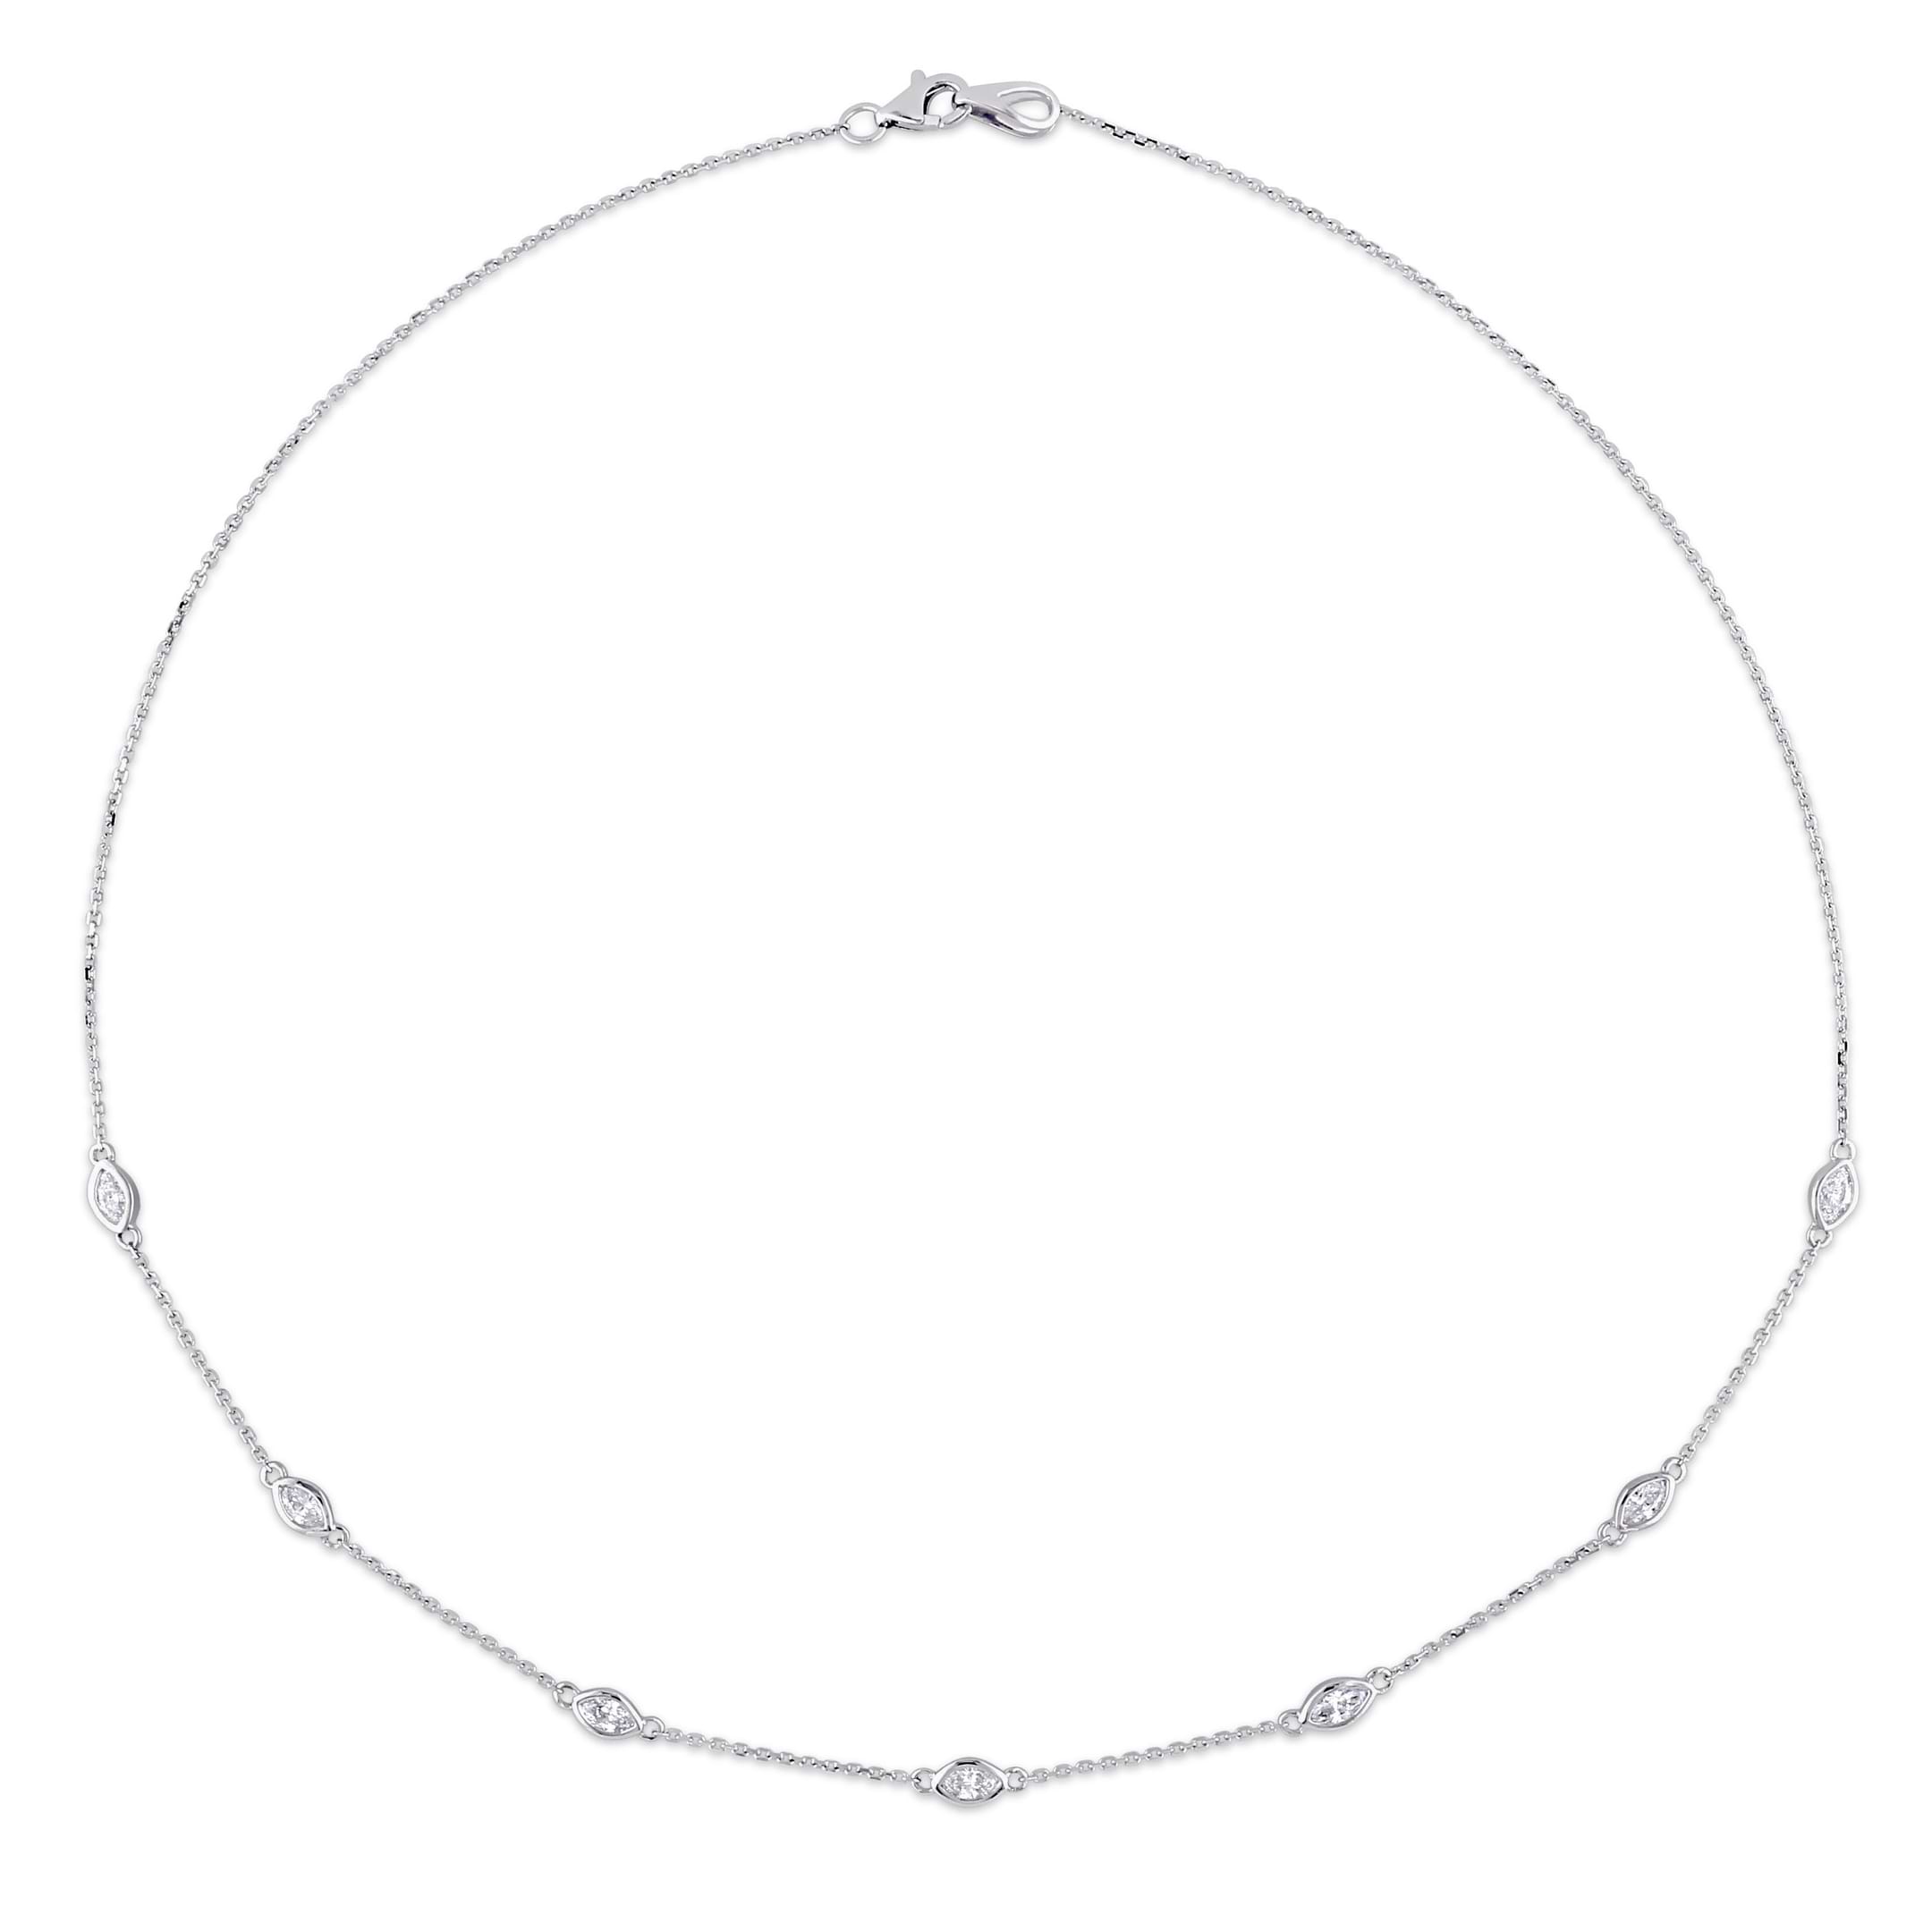 Marquise Diamond Station Necklace 14k White Gold (0.84ct)